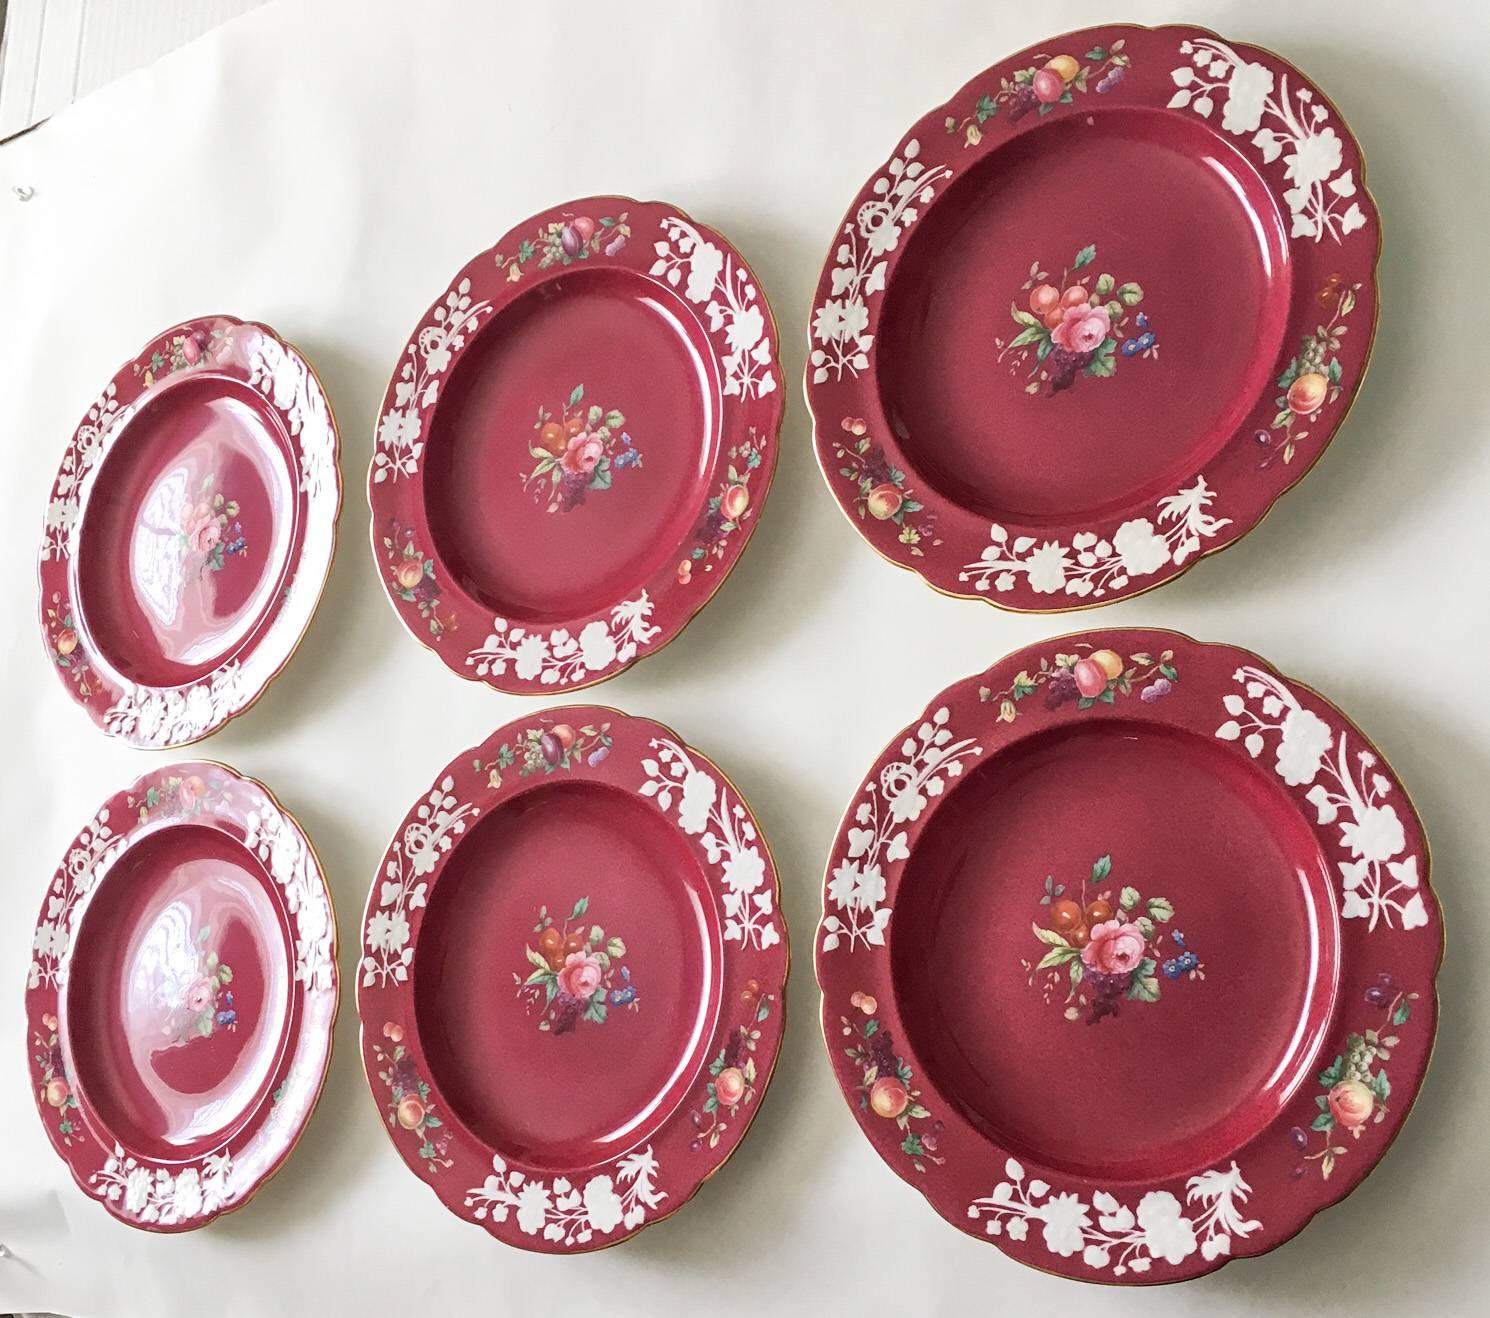 Hand-Painted 19th Century Copeland Spode for Tiffany & Co. Dessert Plates, Set of Six